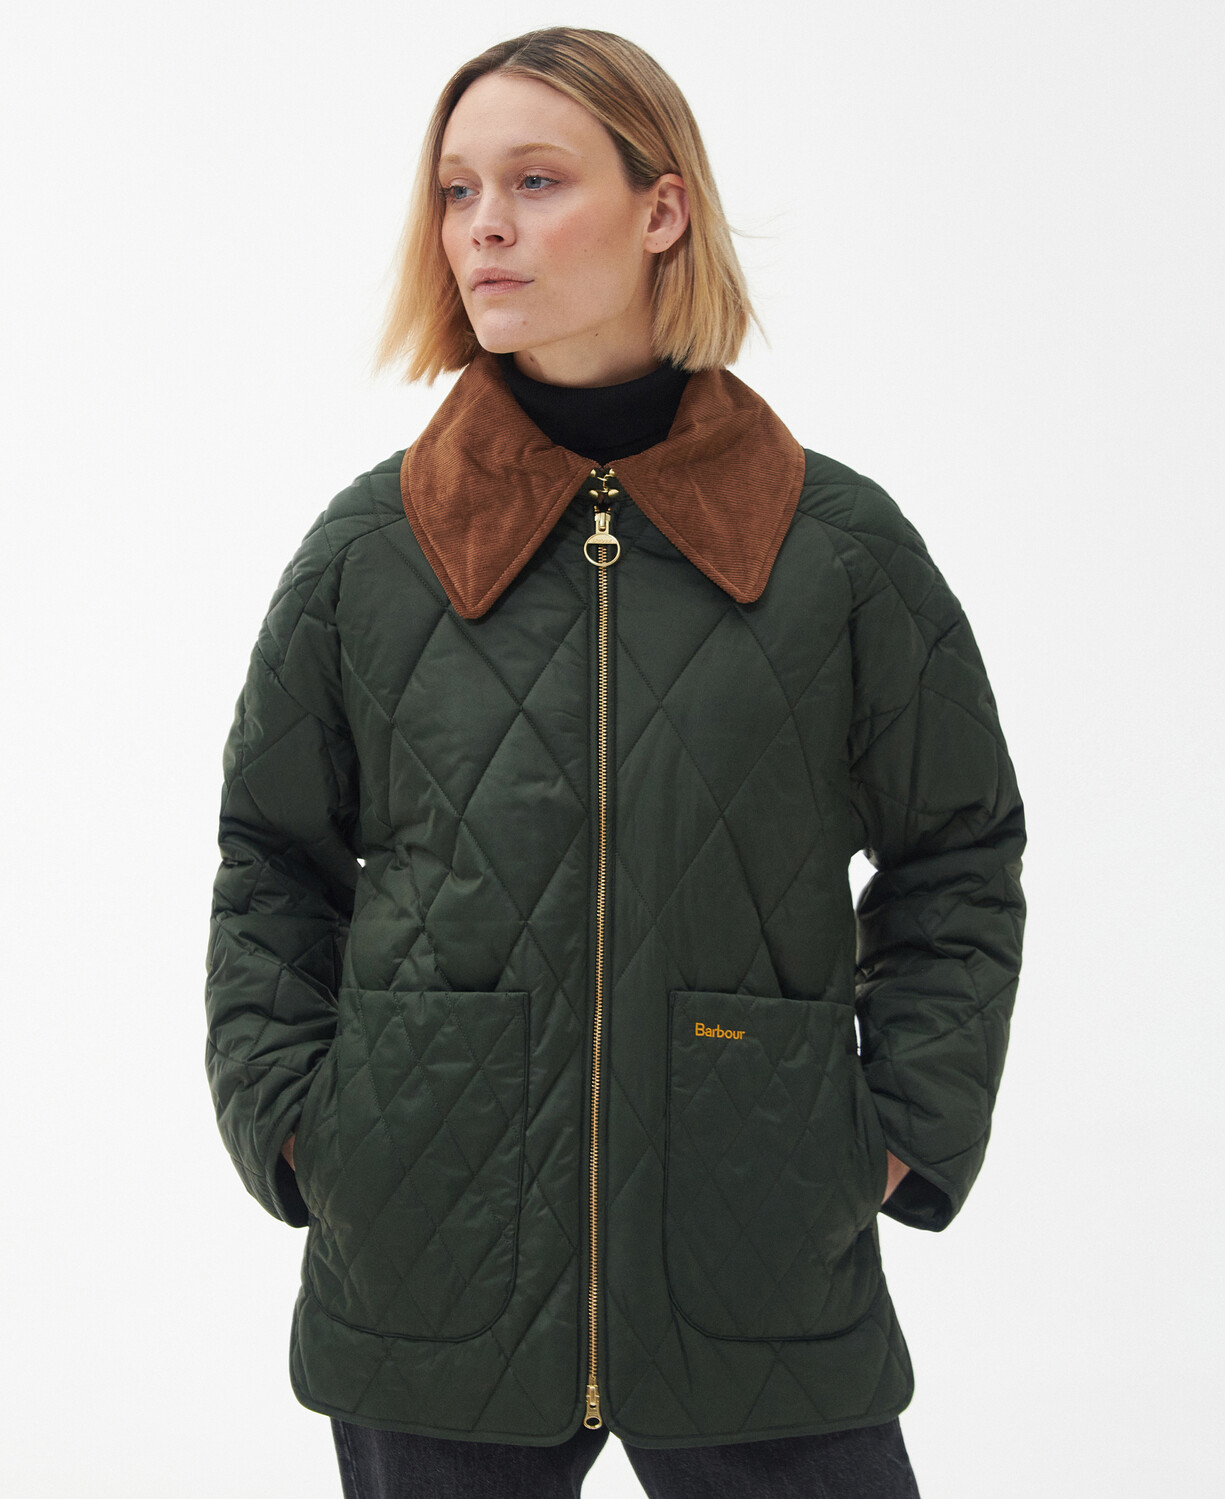 Barbour Women's Woodhall Quilted Jacket - (Sage)